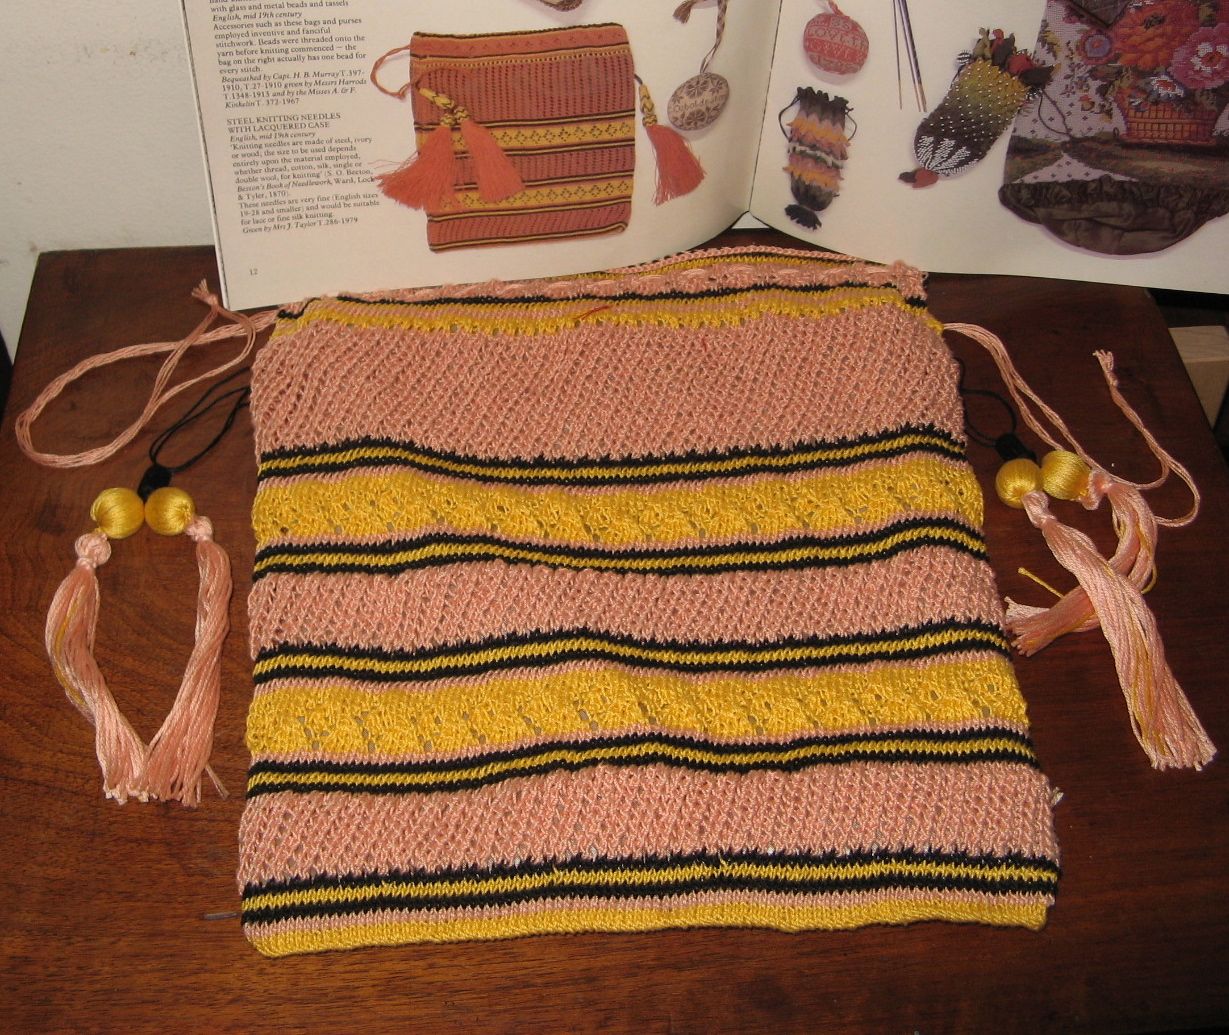 One More Stitch Knitted Bag From The V A